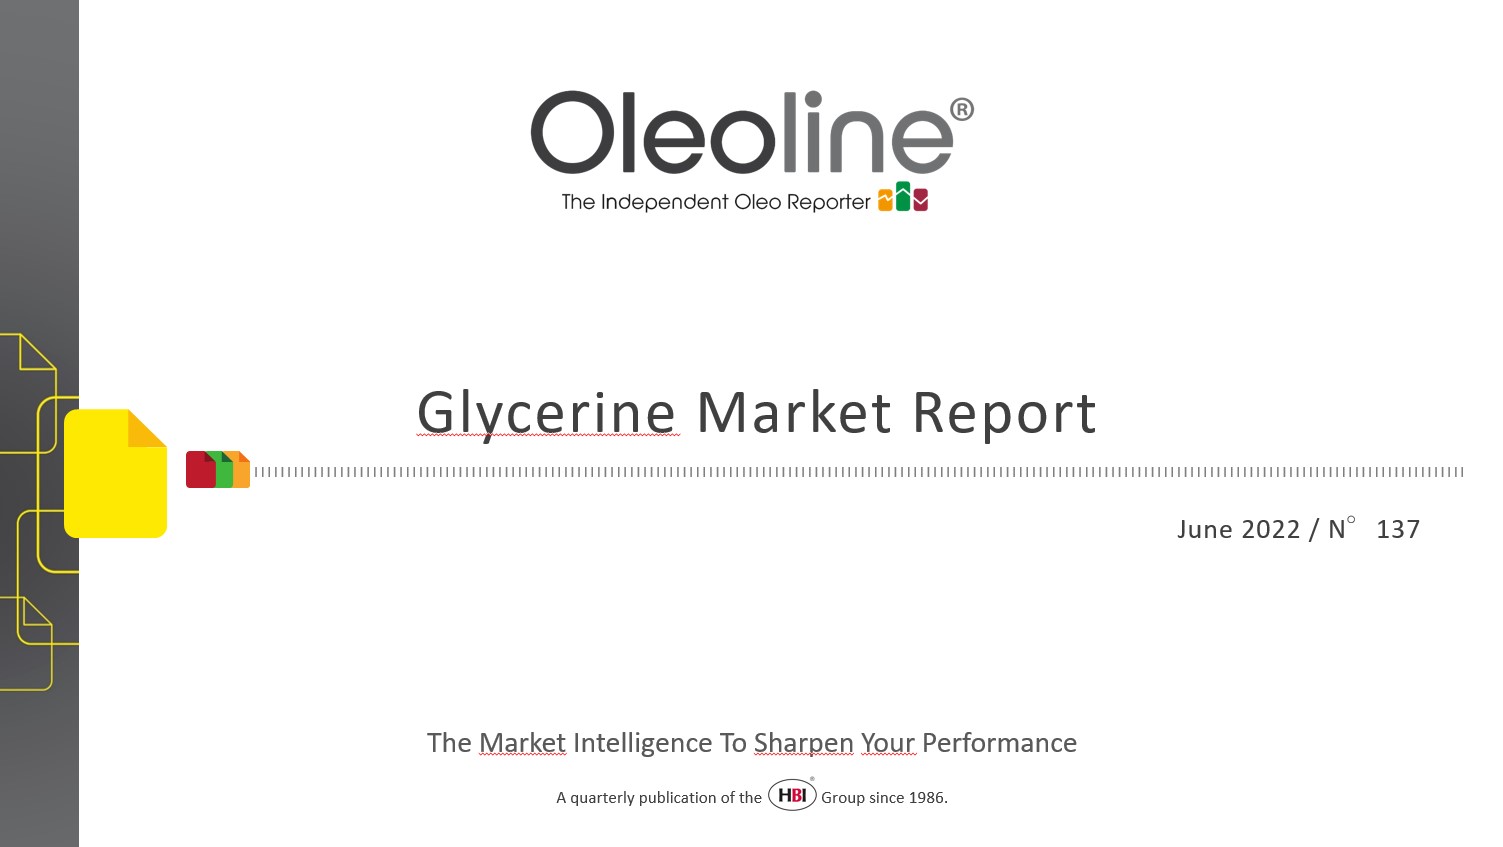 The new quarterly glycerine report has been released this week in PowerPoint format.